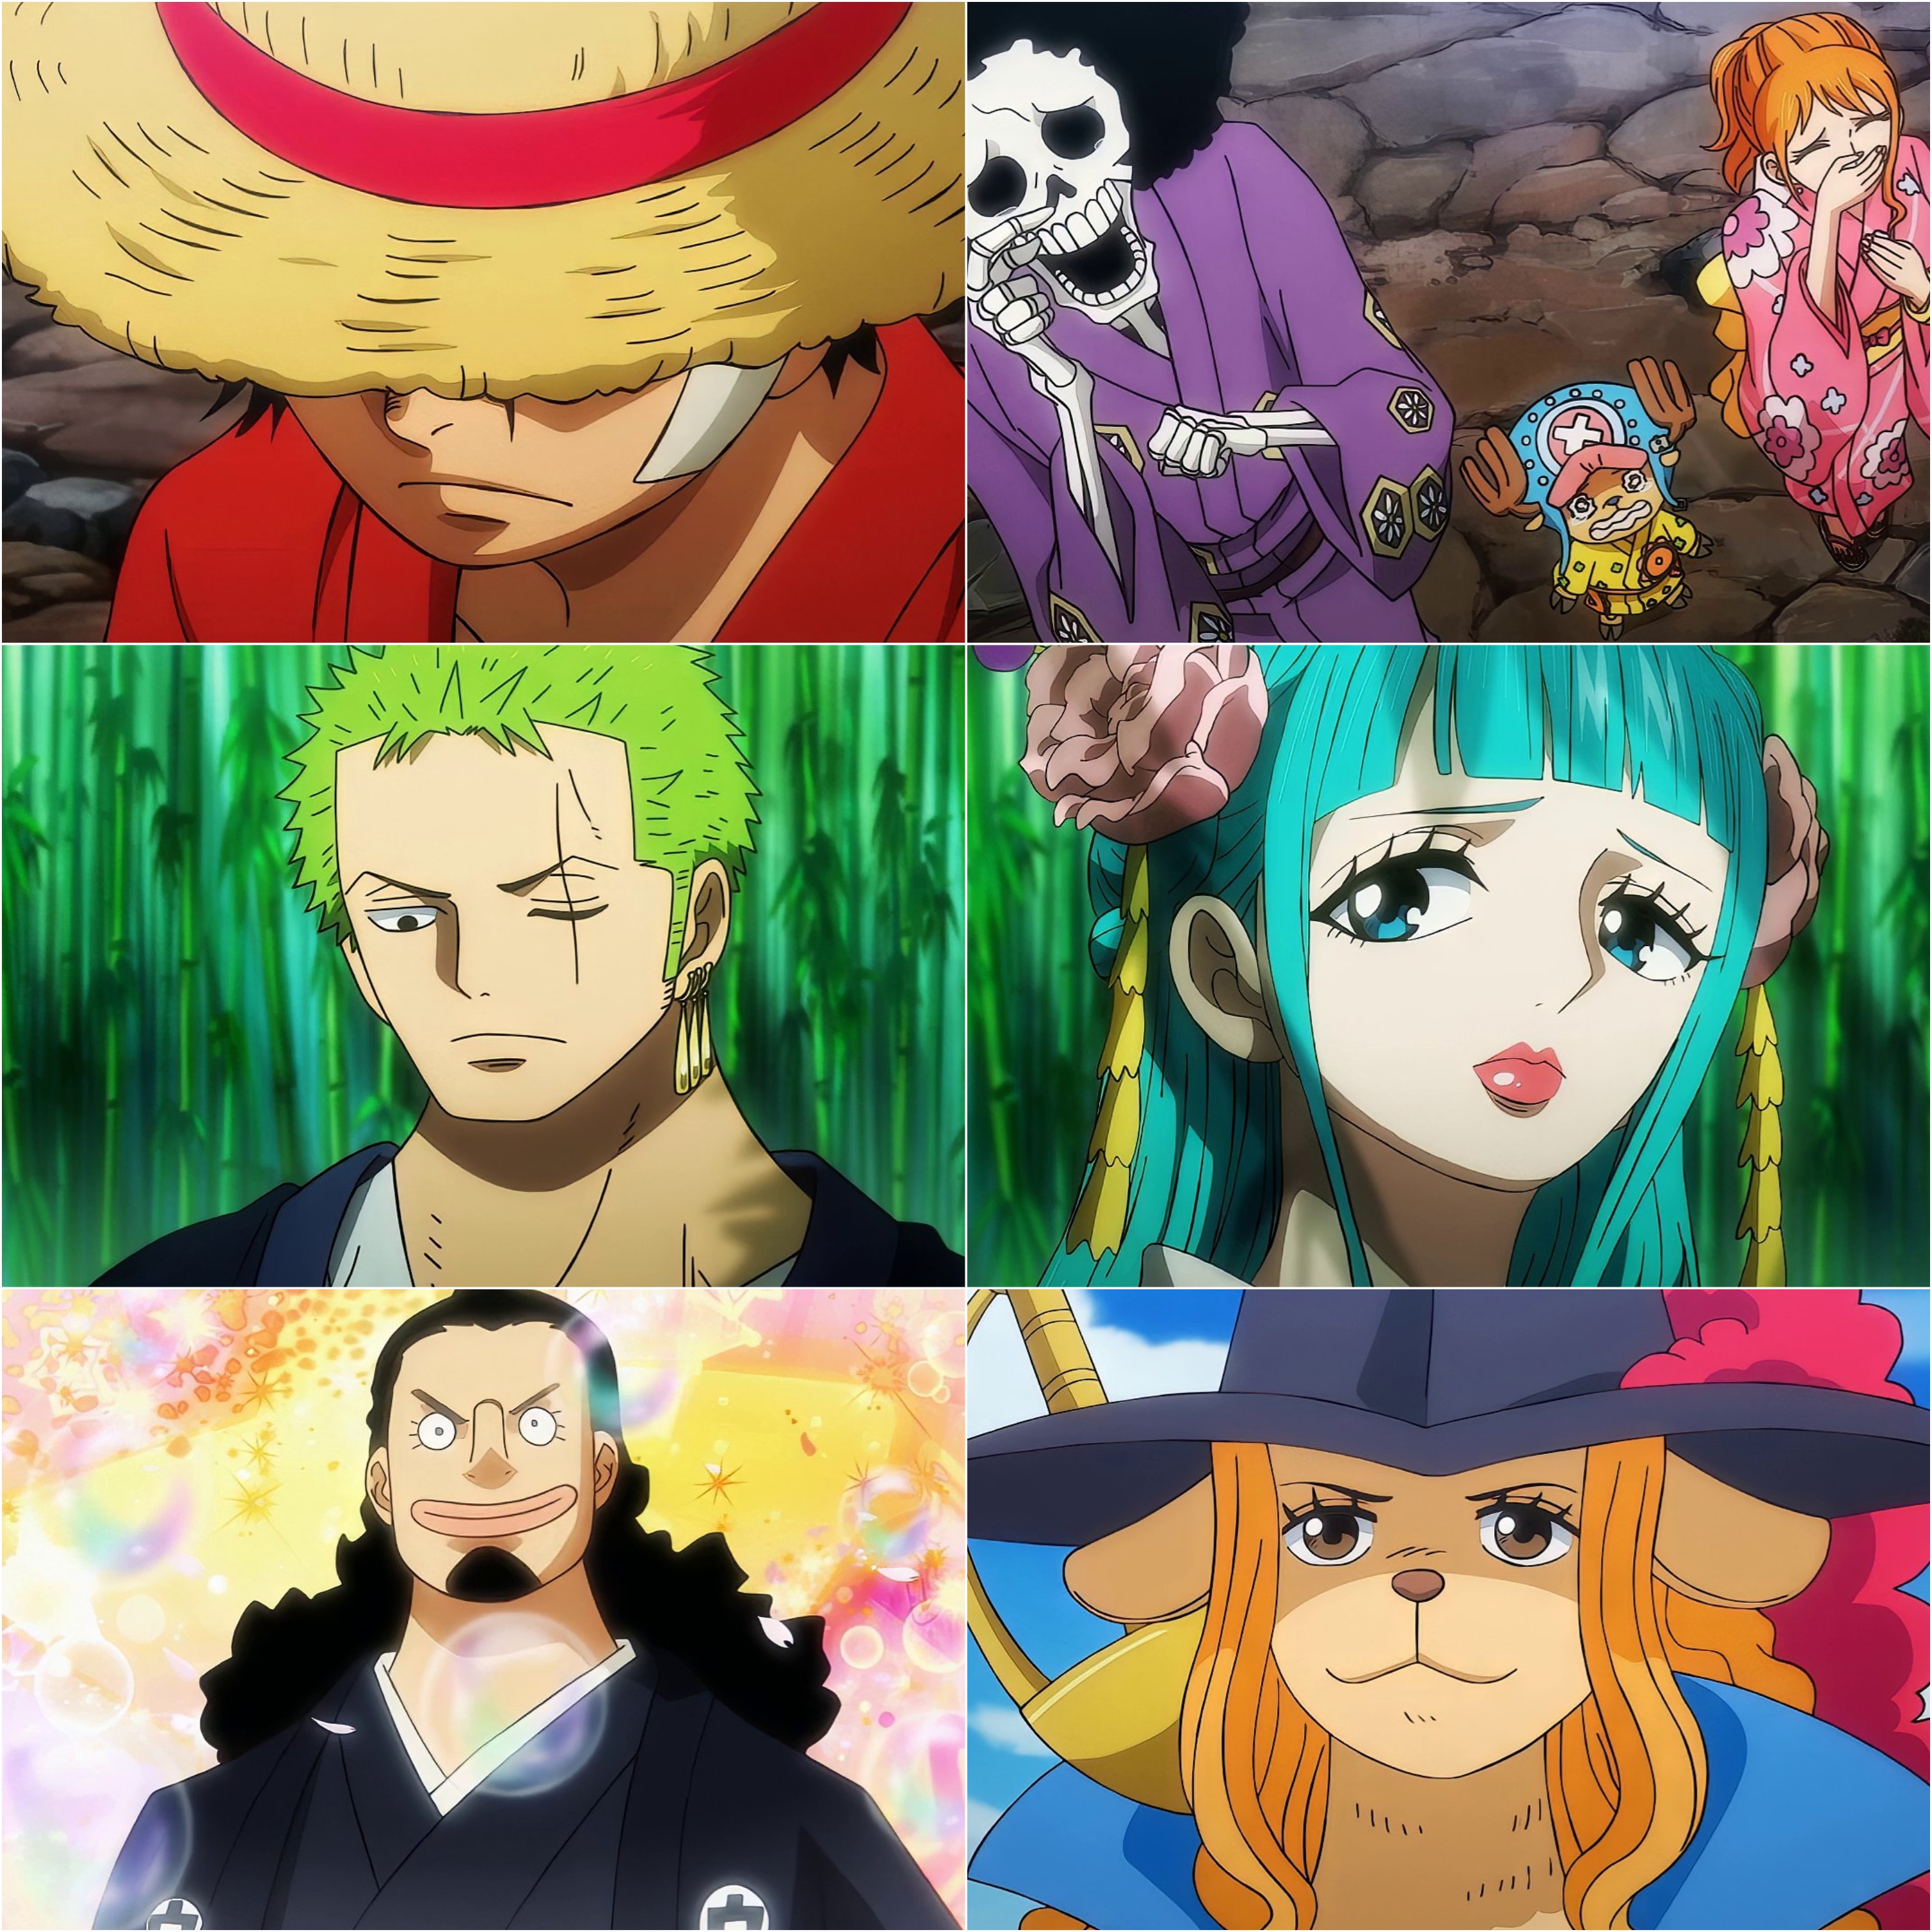 One Piece Episode 1084 Trailer Teases Straw Hats' Departure